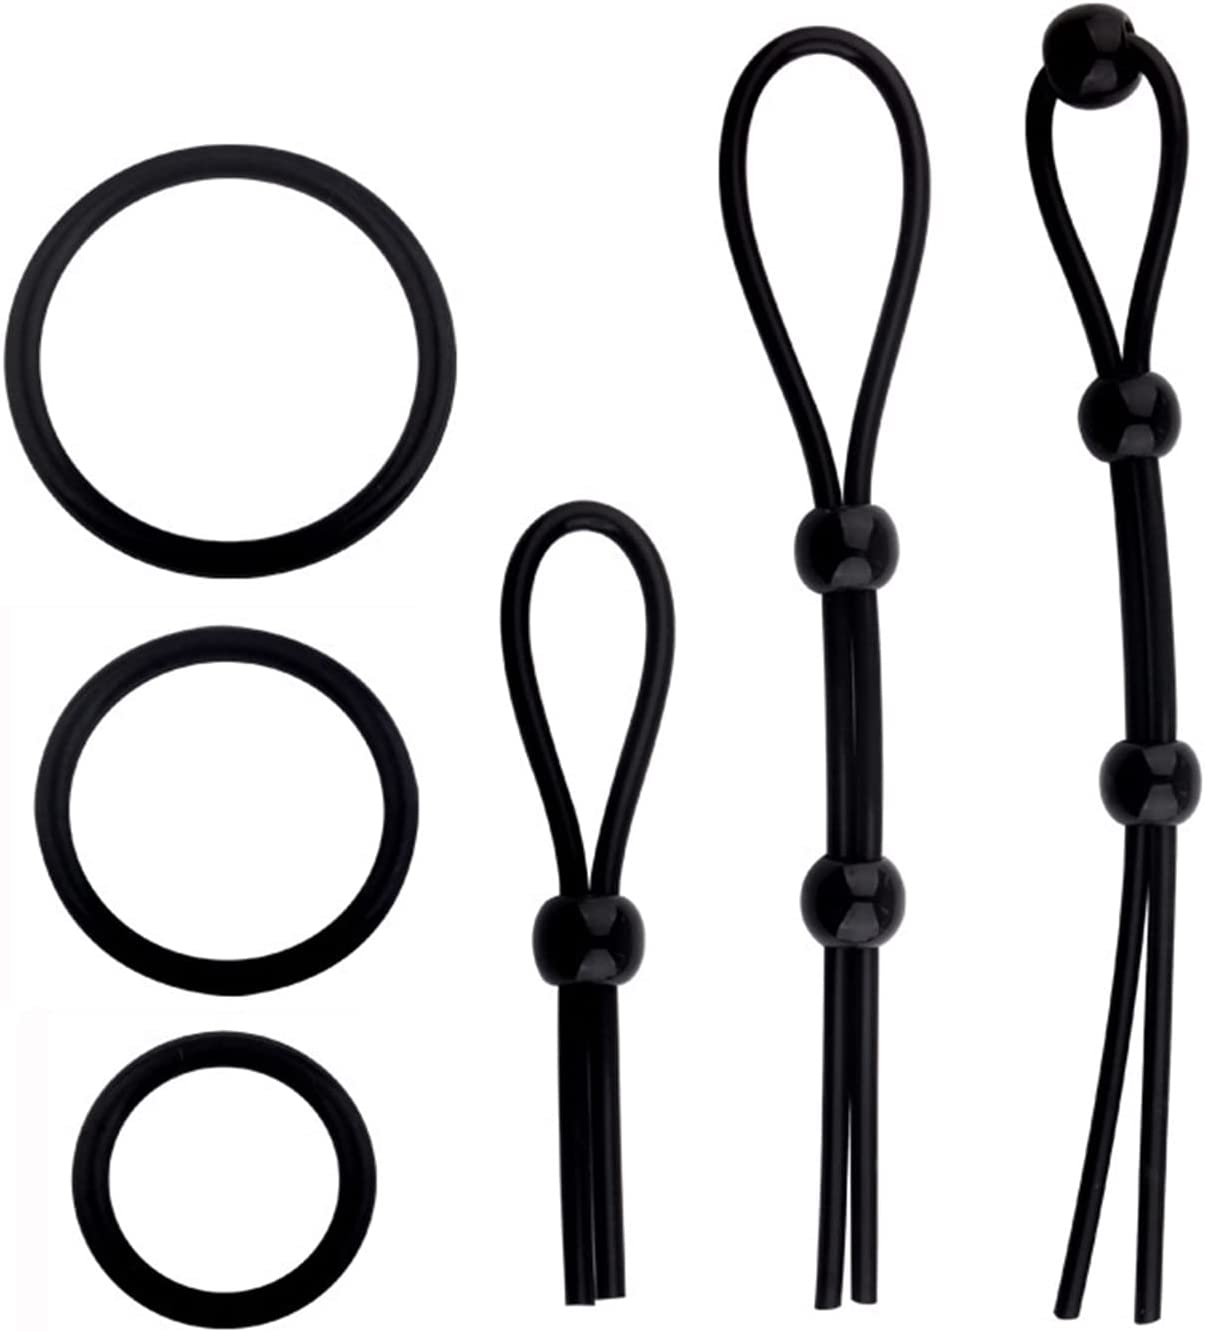 Beauty Molly Superior Silicon Flat Penis Cock Ring Set Crings Erection  Enhancing c-Ring for Men Adult Sex Toys, 3 Rings